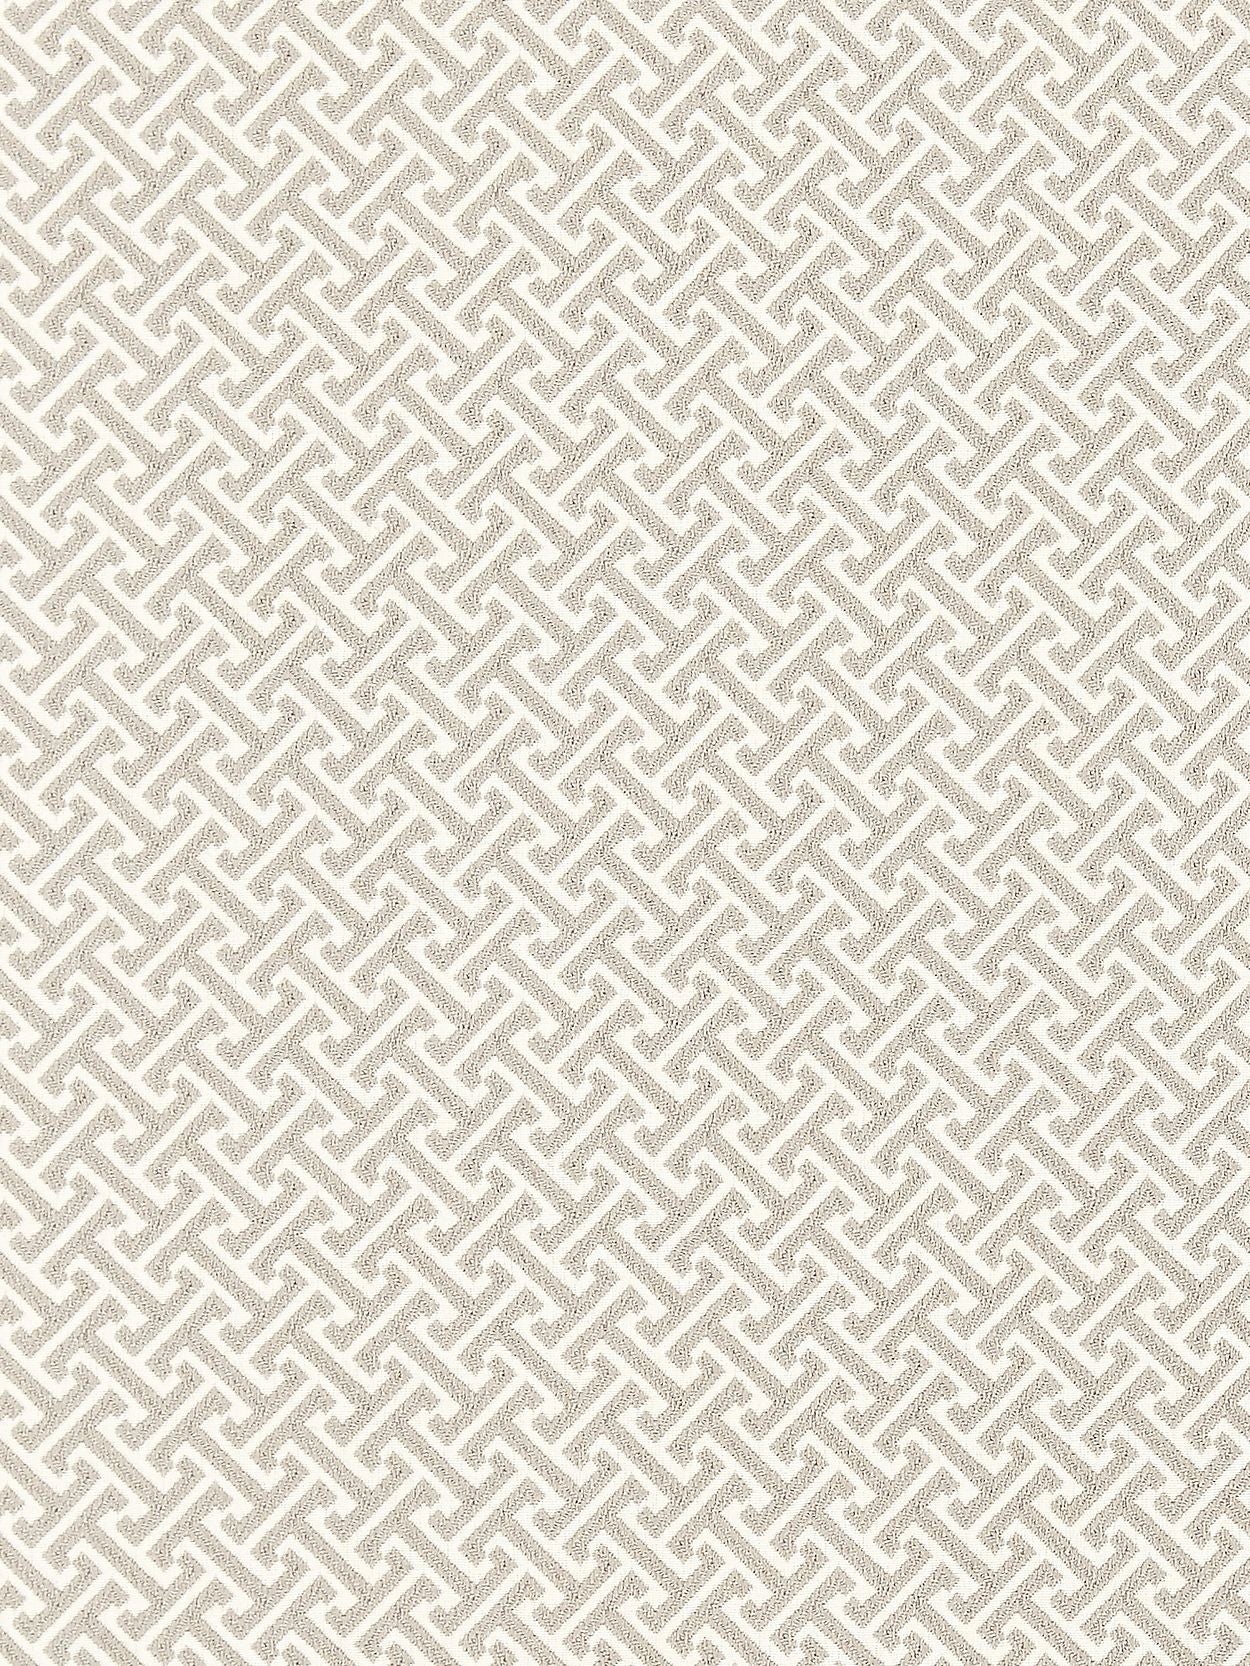 Mandarin Weave fabric in fog color - pattern number SC 000327102 - by Scalamandre in the Scalamandre Fabrics Book 1 collection